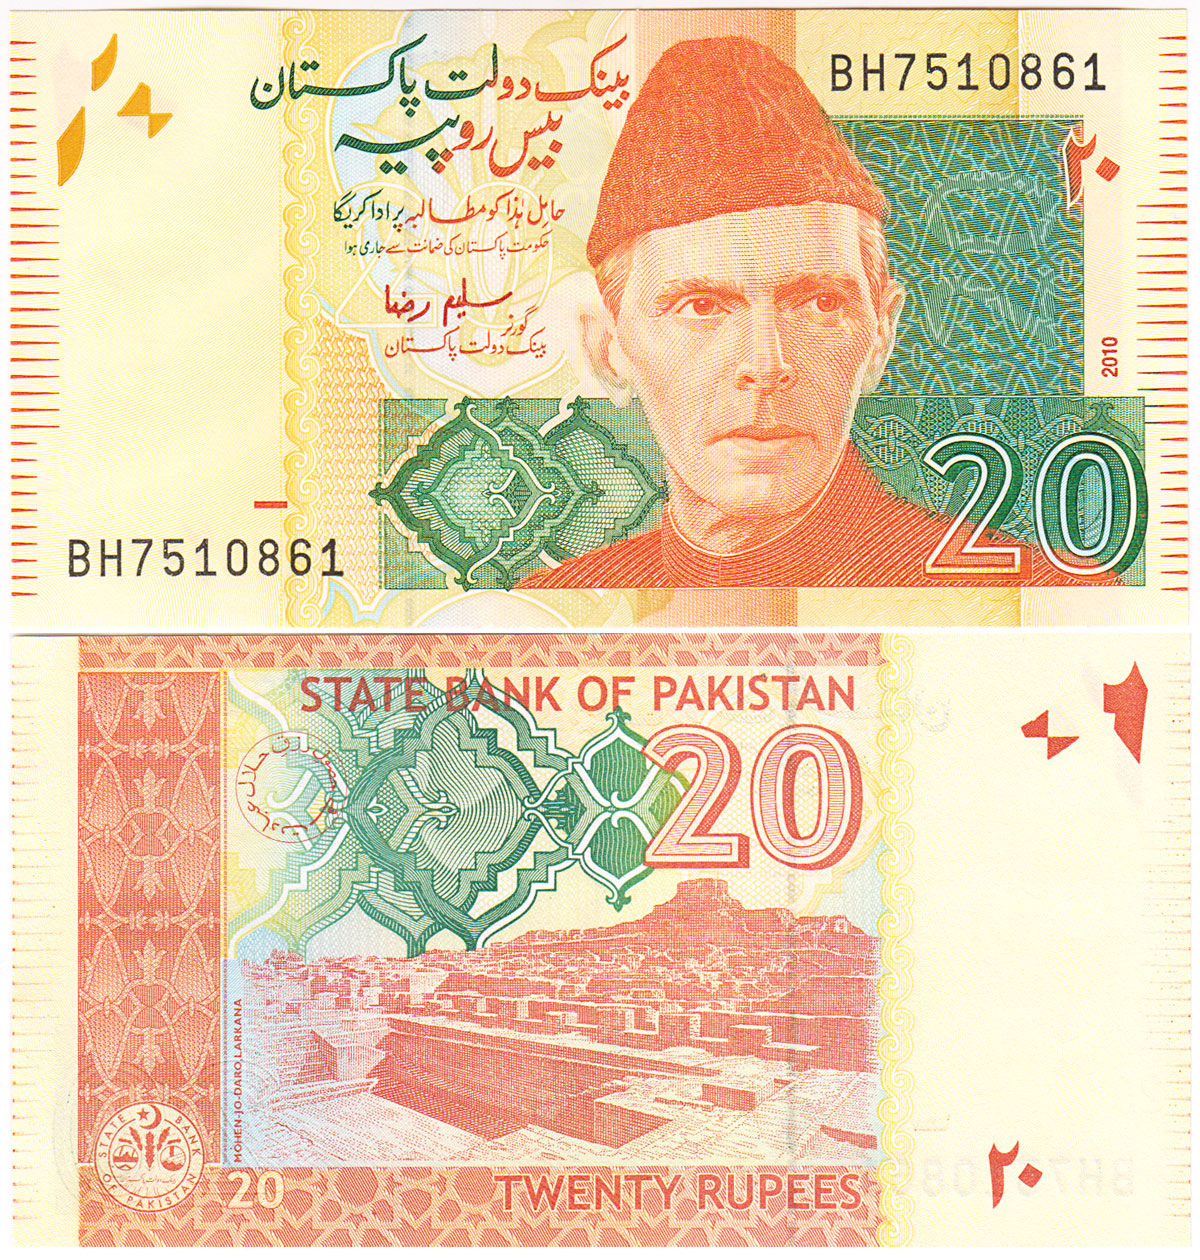 World Currencies: Pakistan's Currency